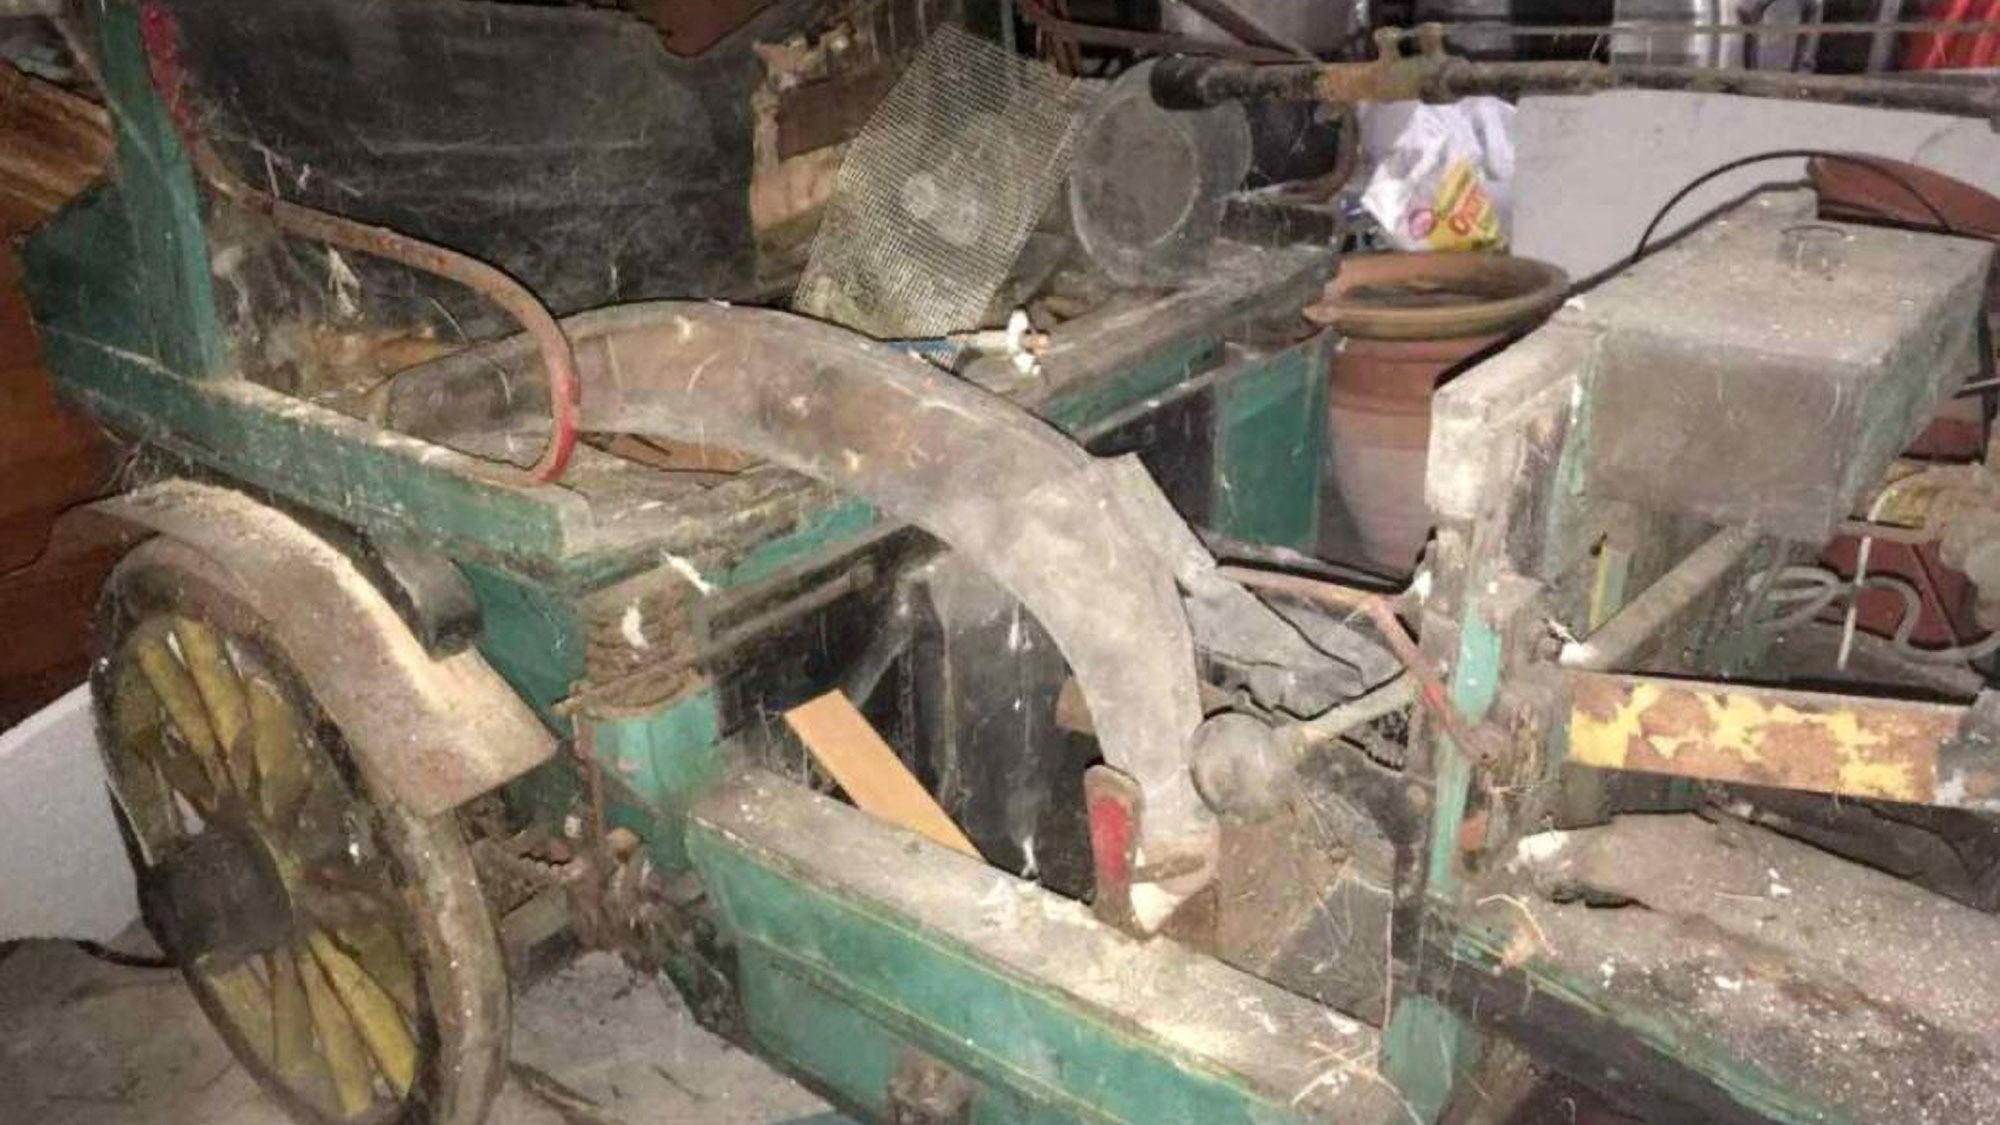 Read more about the article Possibly Worlds Oldest Car Worth Millions Sold For Peanuts After Found Rotting In Shed